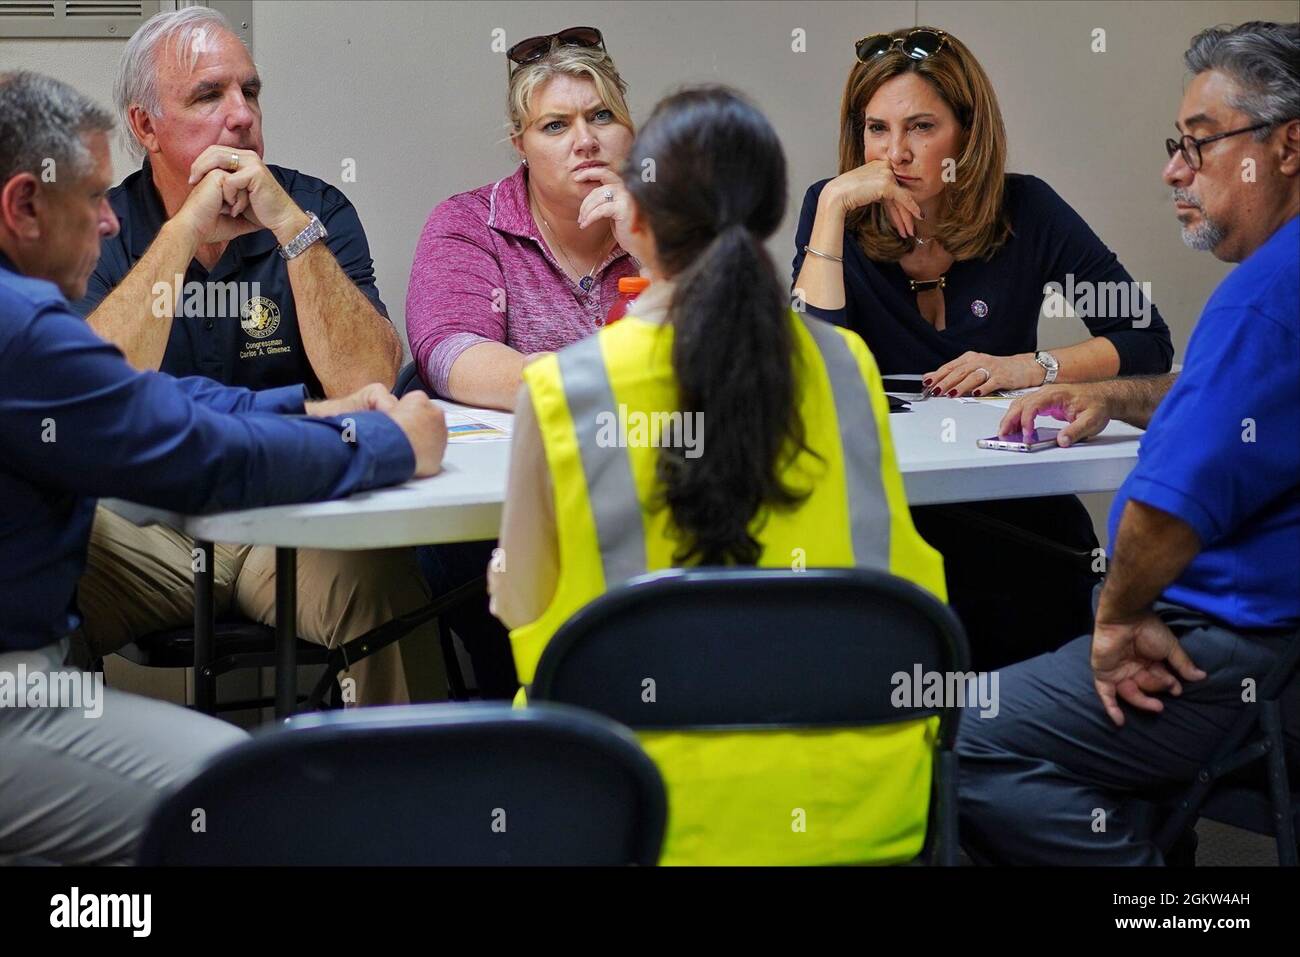 MIAMI, FL (July 4, 2021) – FCO Tom McCool, Rep. Carlos A. Giménez (FL-26), Rep. Kat Cammack (FL-3), Rep. María E. Salazar (FL-27) and Roberto Baltodano from SBA sit at a roundtable briefing by Dr. Judith Mitrani-Reiser from the National Institute of Standards and Technology Stock Photo